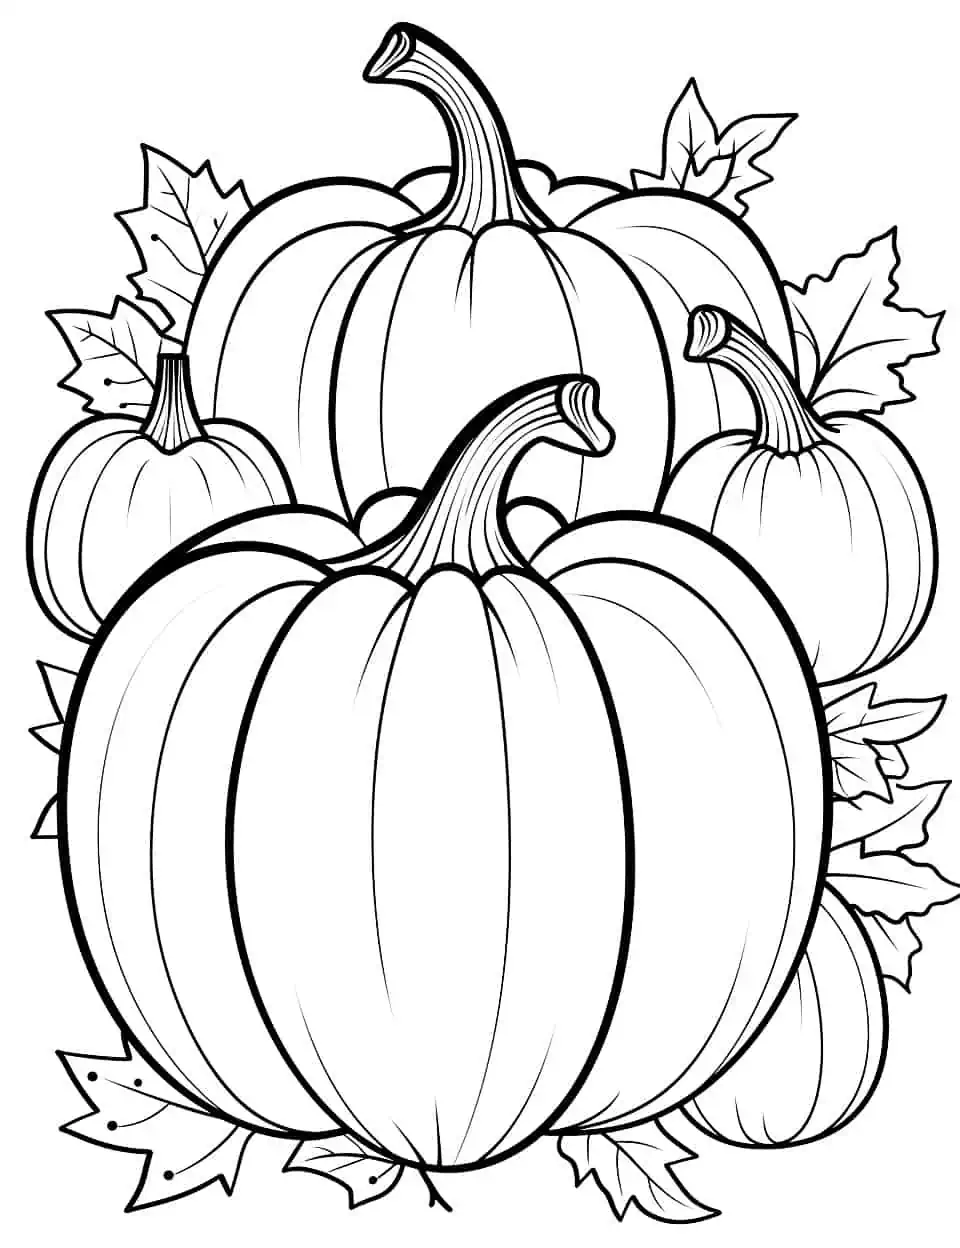 Pumpkin Page Coloring - A coloring page full of pumpkins of different sizes, ideal for developing attention to detail.